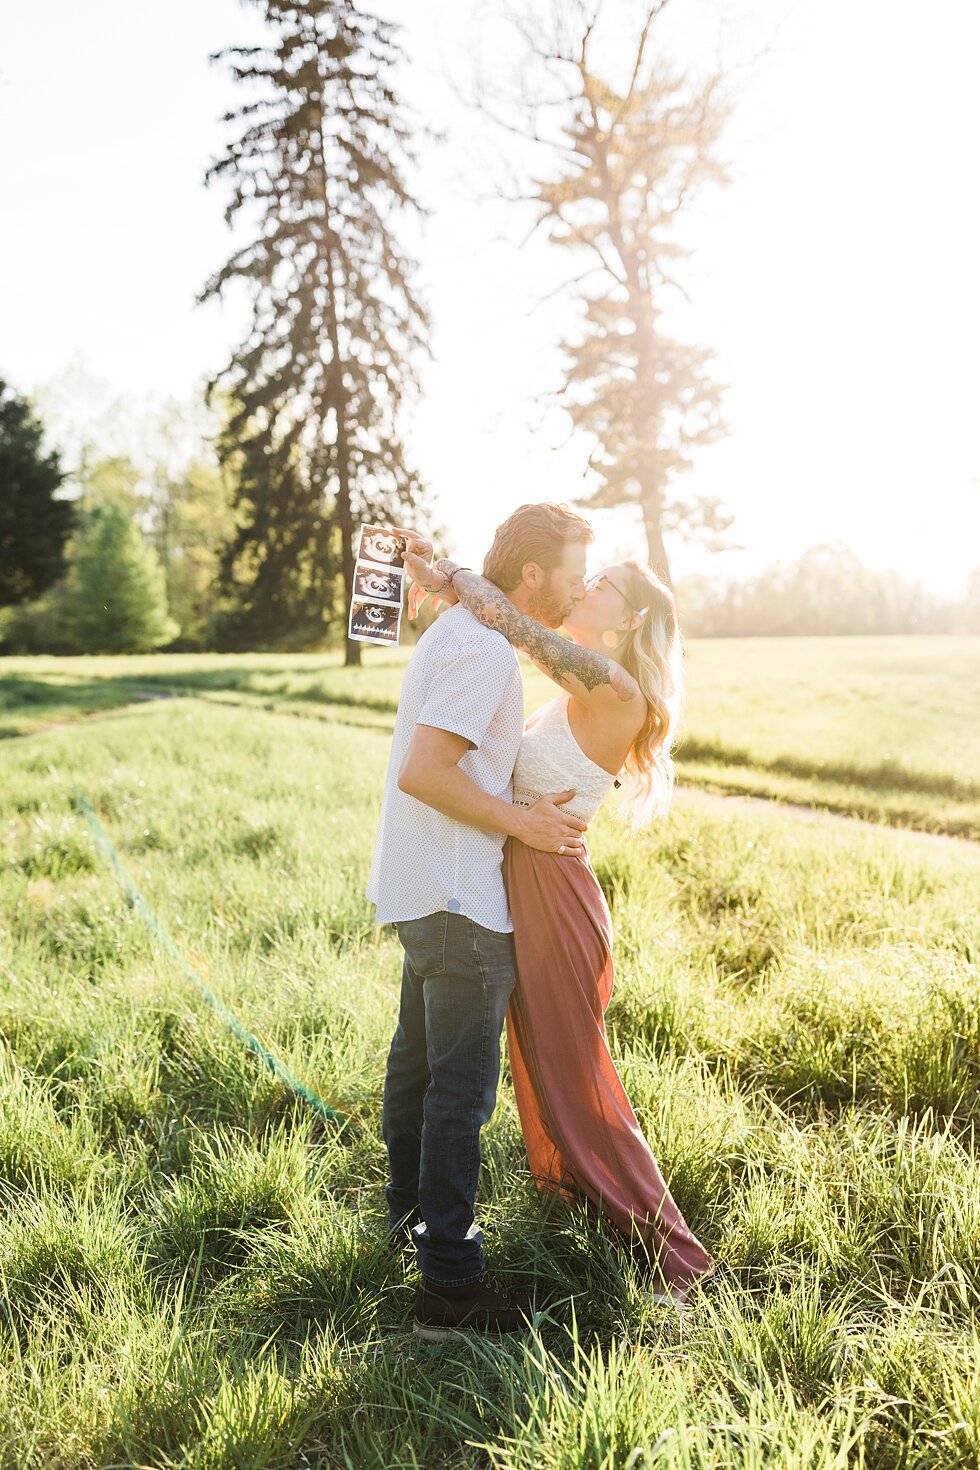  Perfect lighting to end a southern spring maternity session as this couple celebrates their new addition! announcement for a southern spring session. couple baby on the way expecting excited maternity photography congratulations announcement baby co